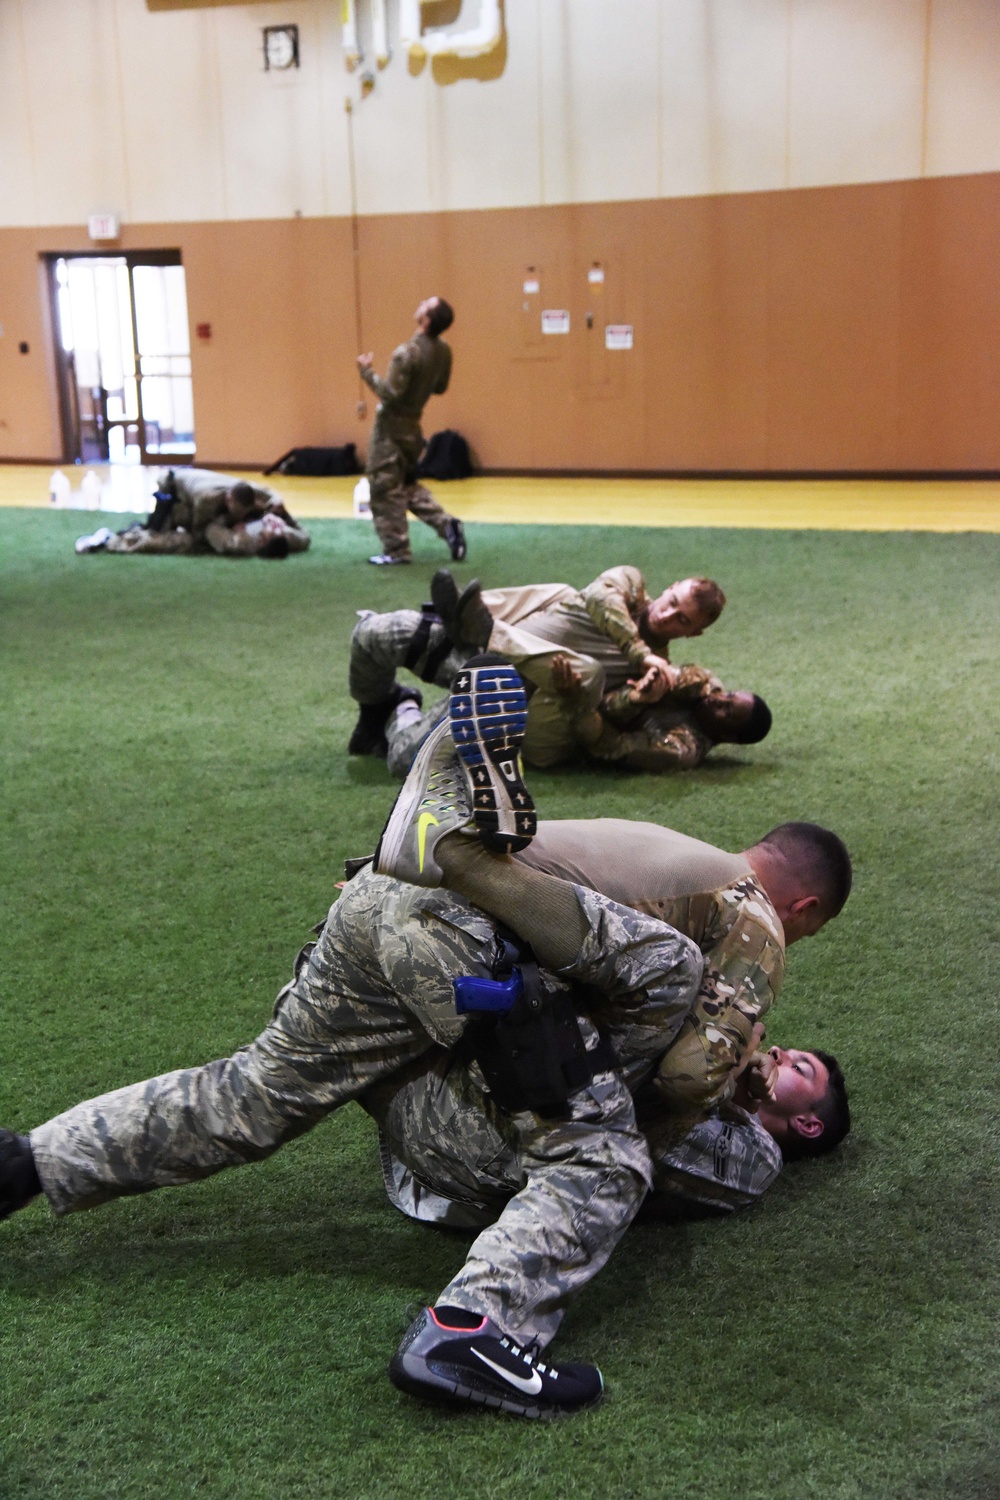 Combatives course teaches hand-to-hand combat